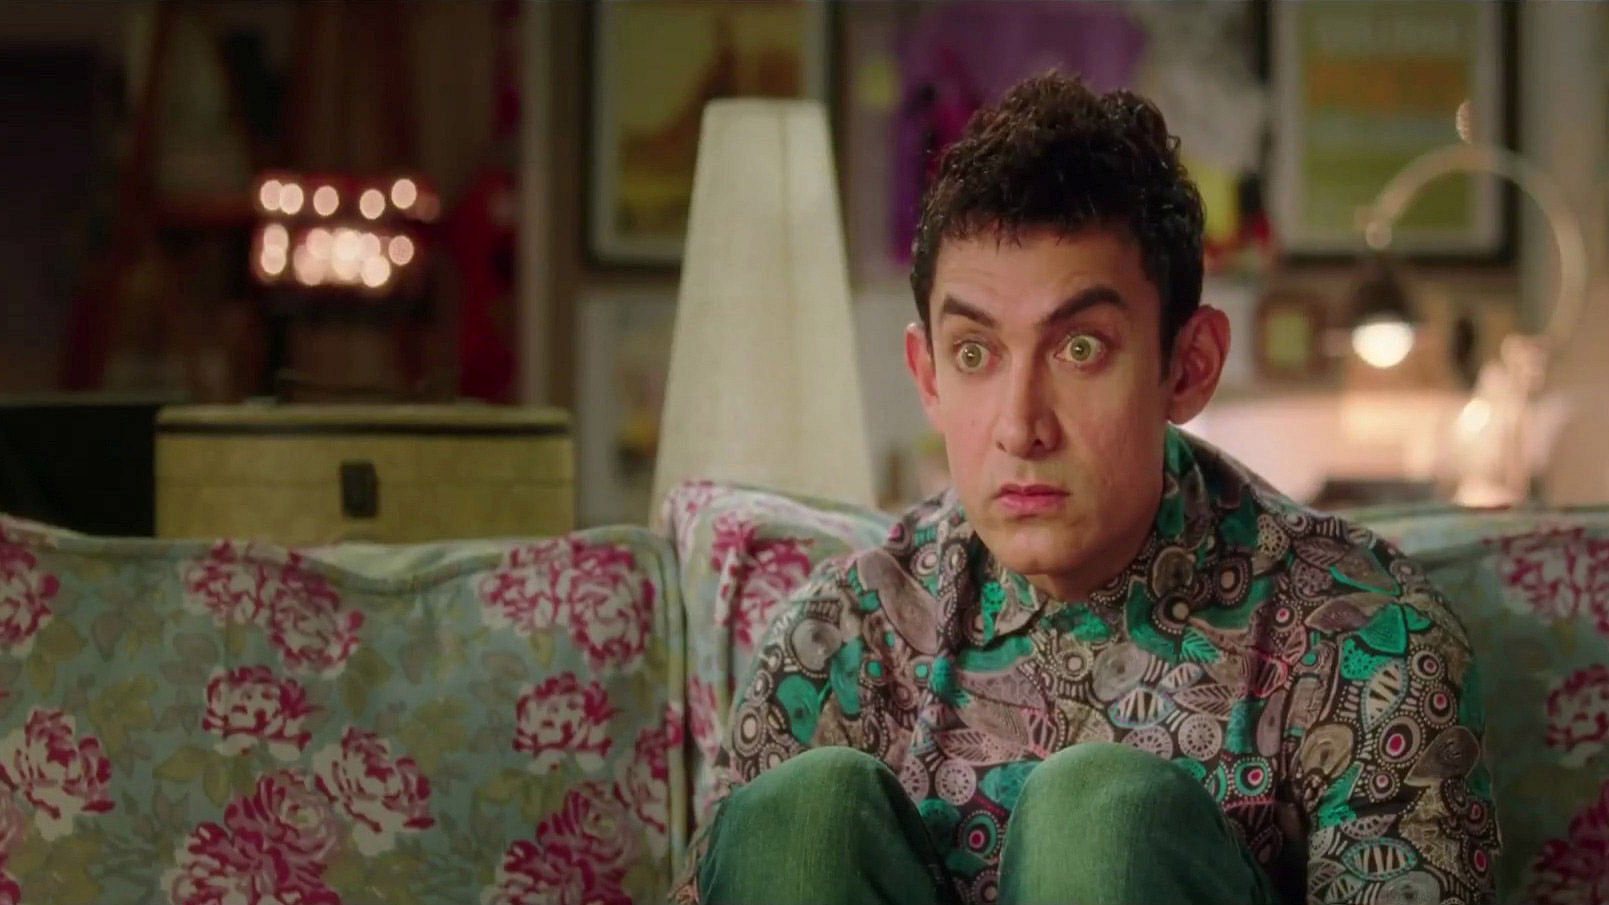 Aamir Khan does it again but this time, minus the tears. (Photo: Screengrab from PK)